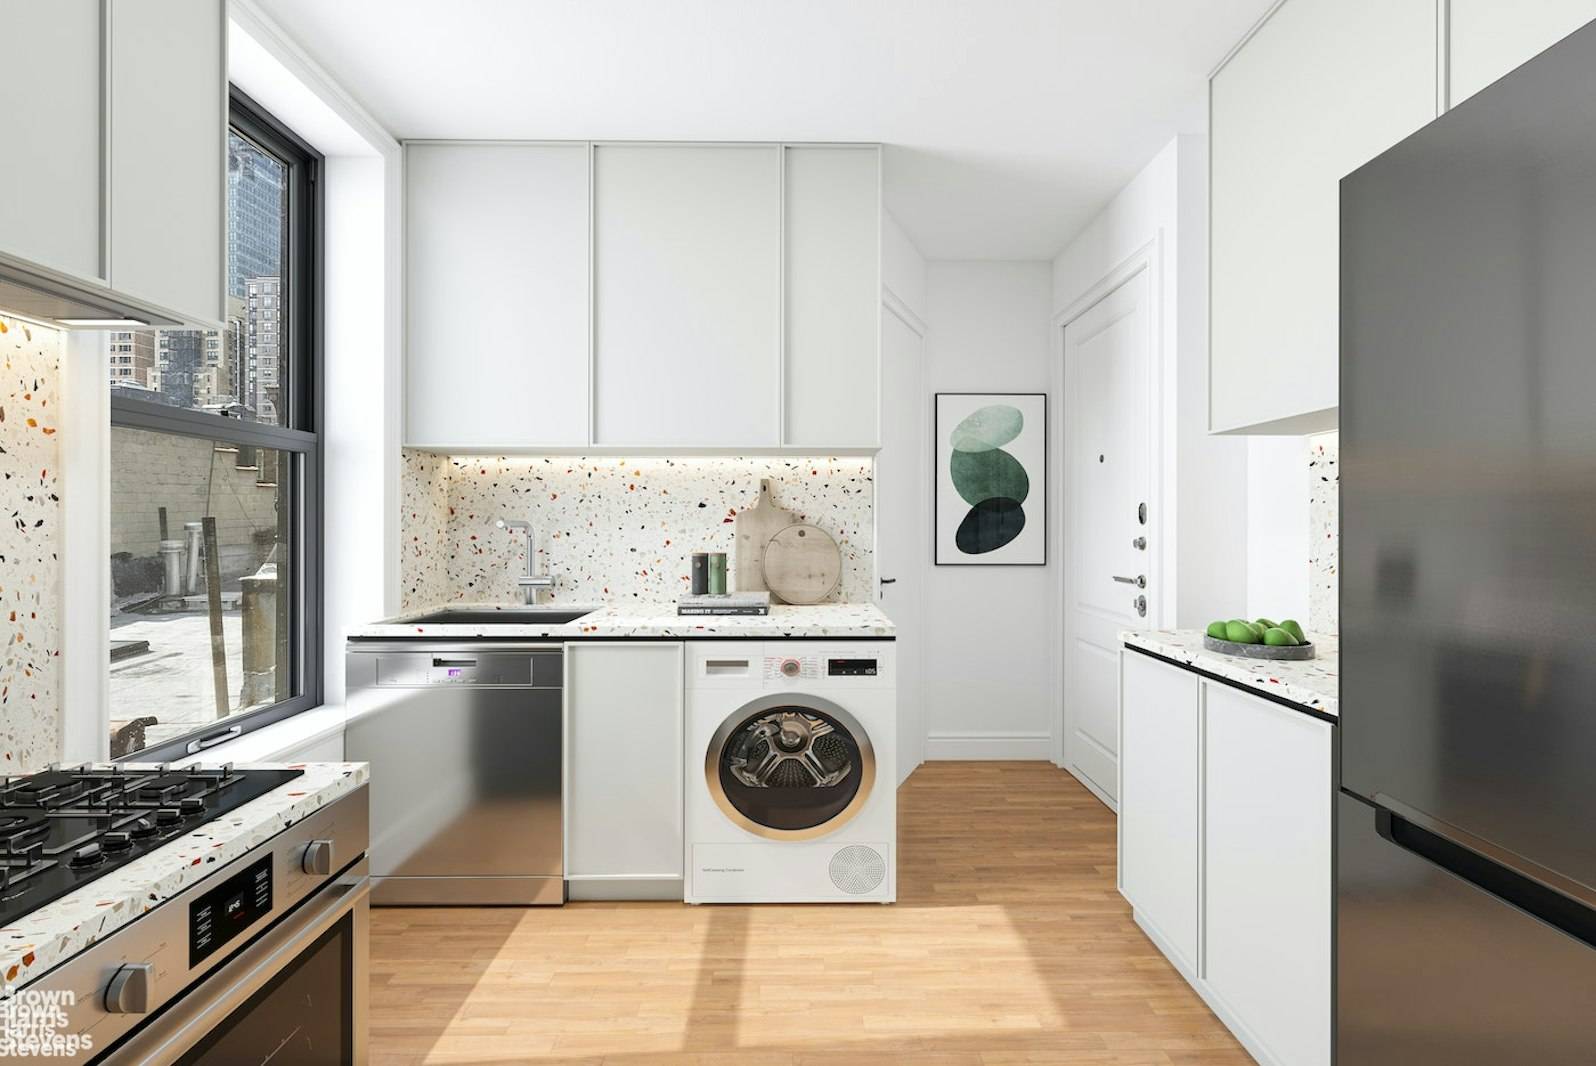 Come see Residence 25, a sun flooded and serene 2 bedroom, 1 bathroom home located in the heart of Hell's Kitchen, the most vibrant and exciting area of New York ...